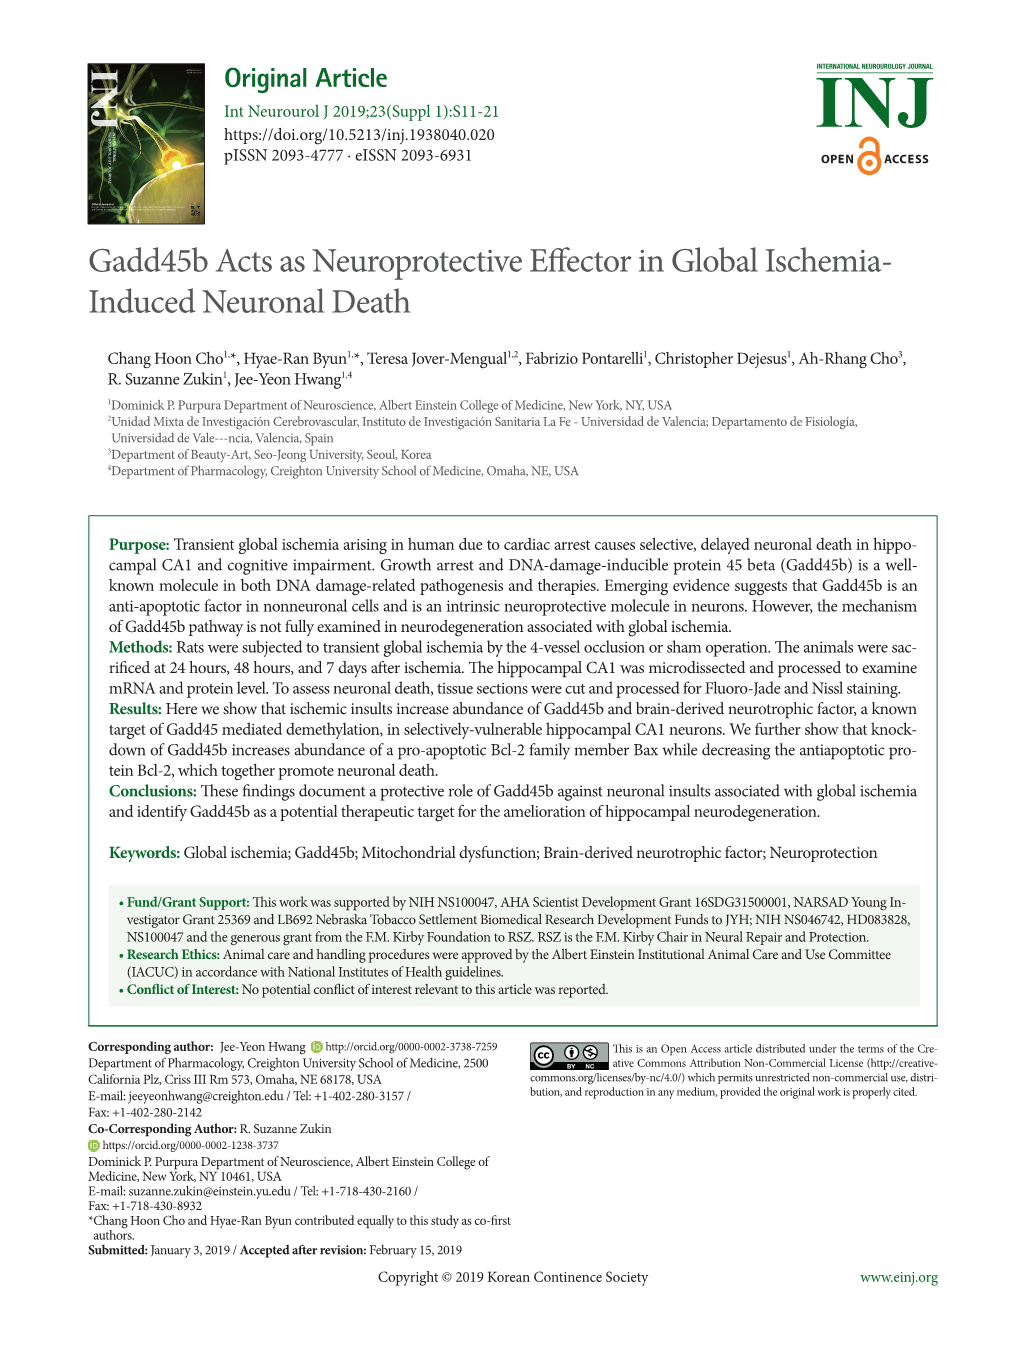 Gadd45b Acts As Neuroprotective Effector in Global Ischemia- Induced Neuronal Death